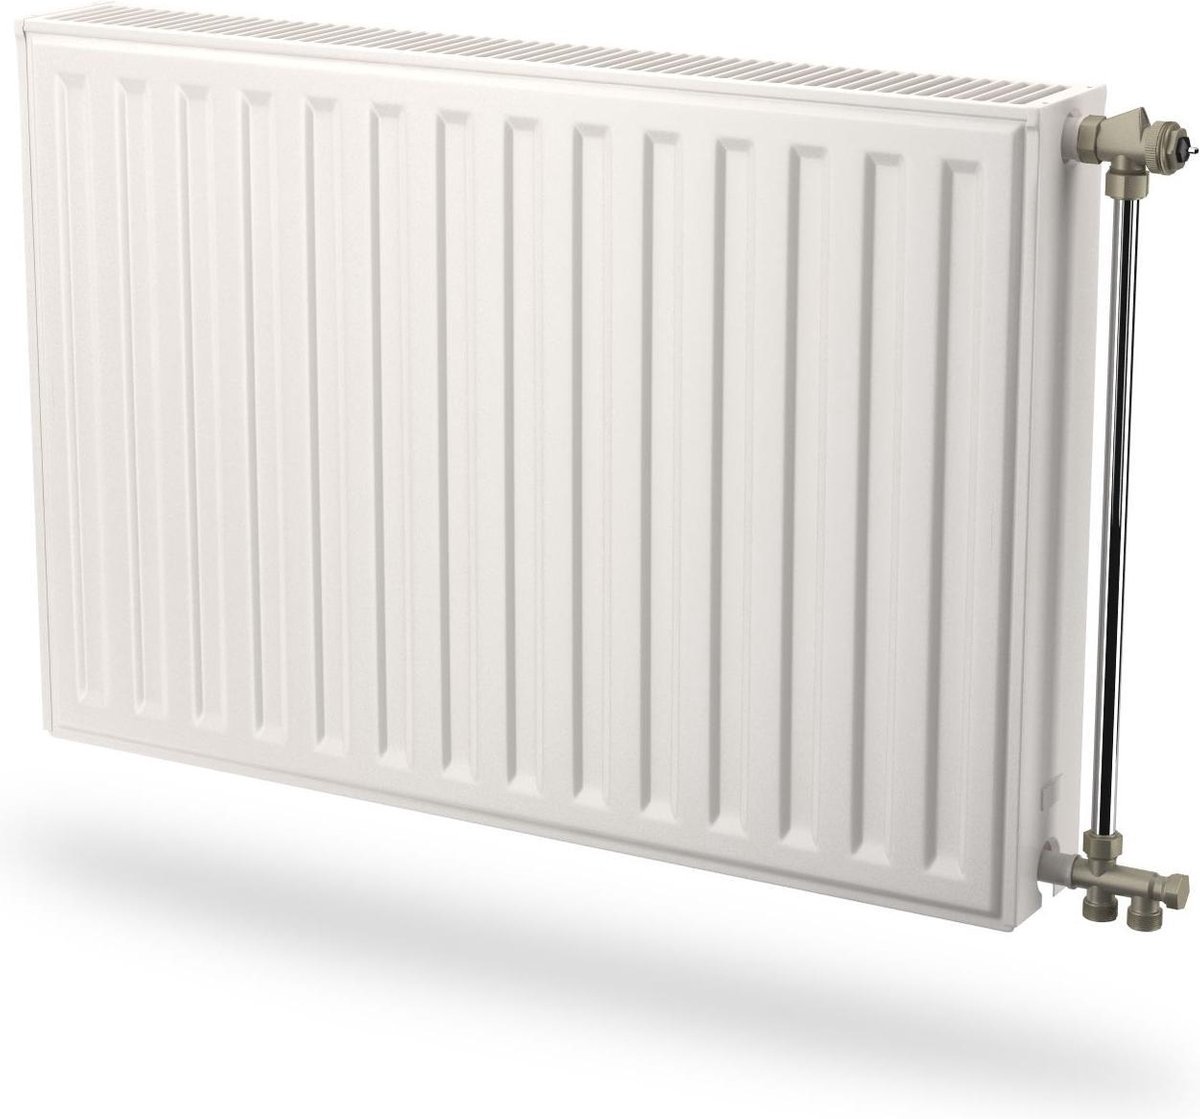 Radson paneelradiator Compact, staal, wit, (hxlxd) 300x750x65mm, 11